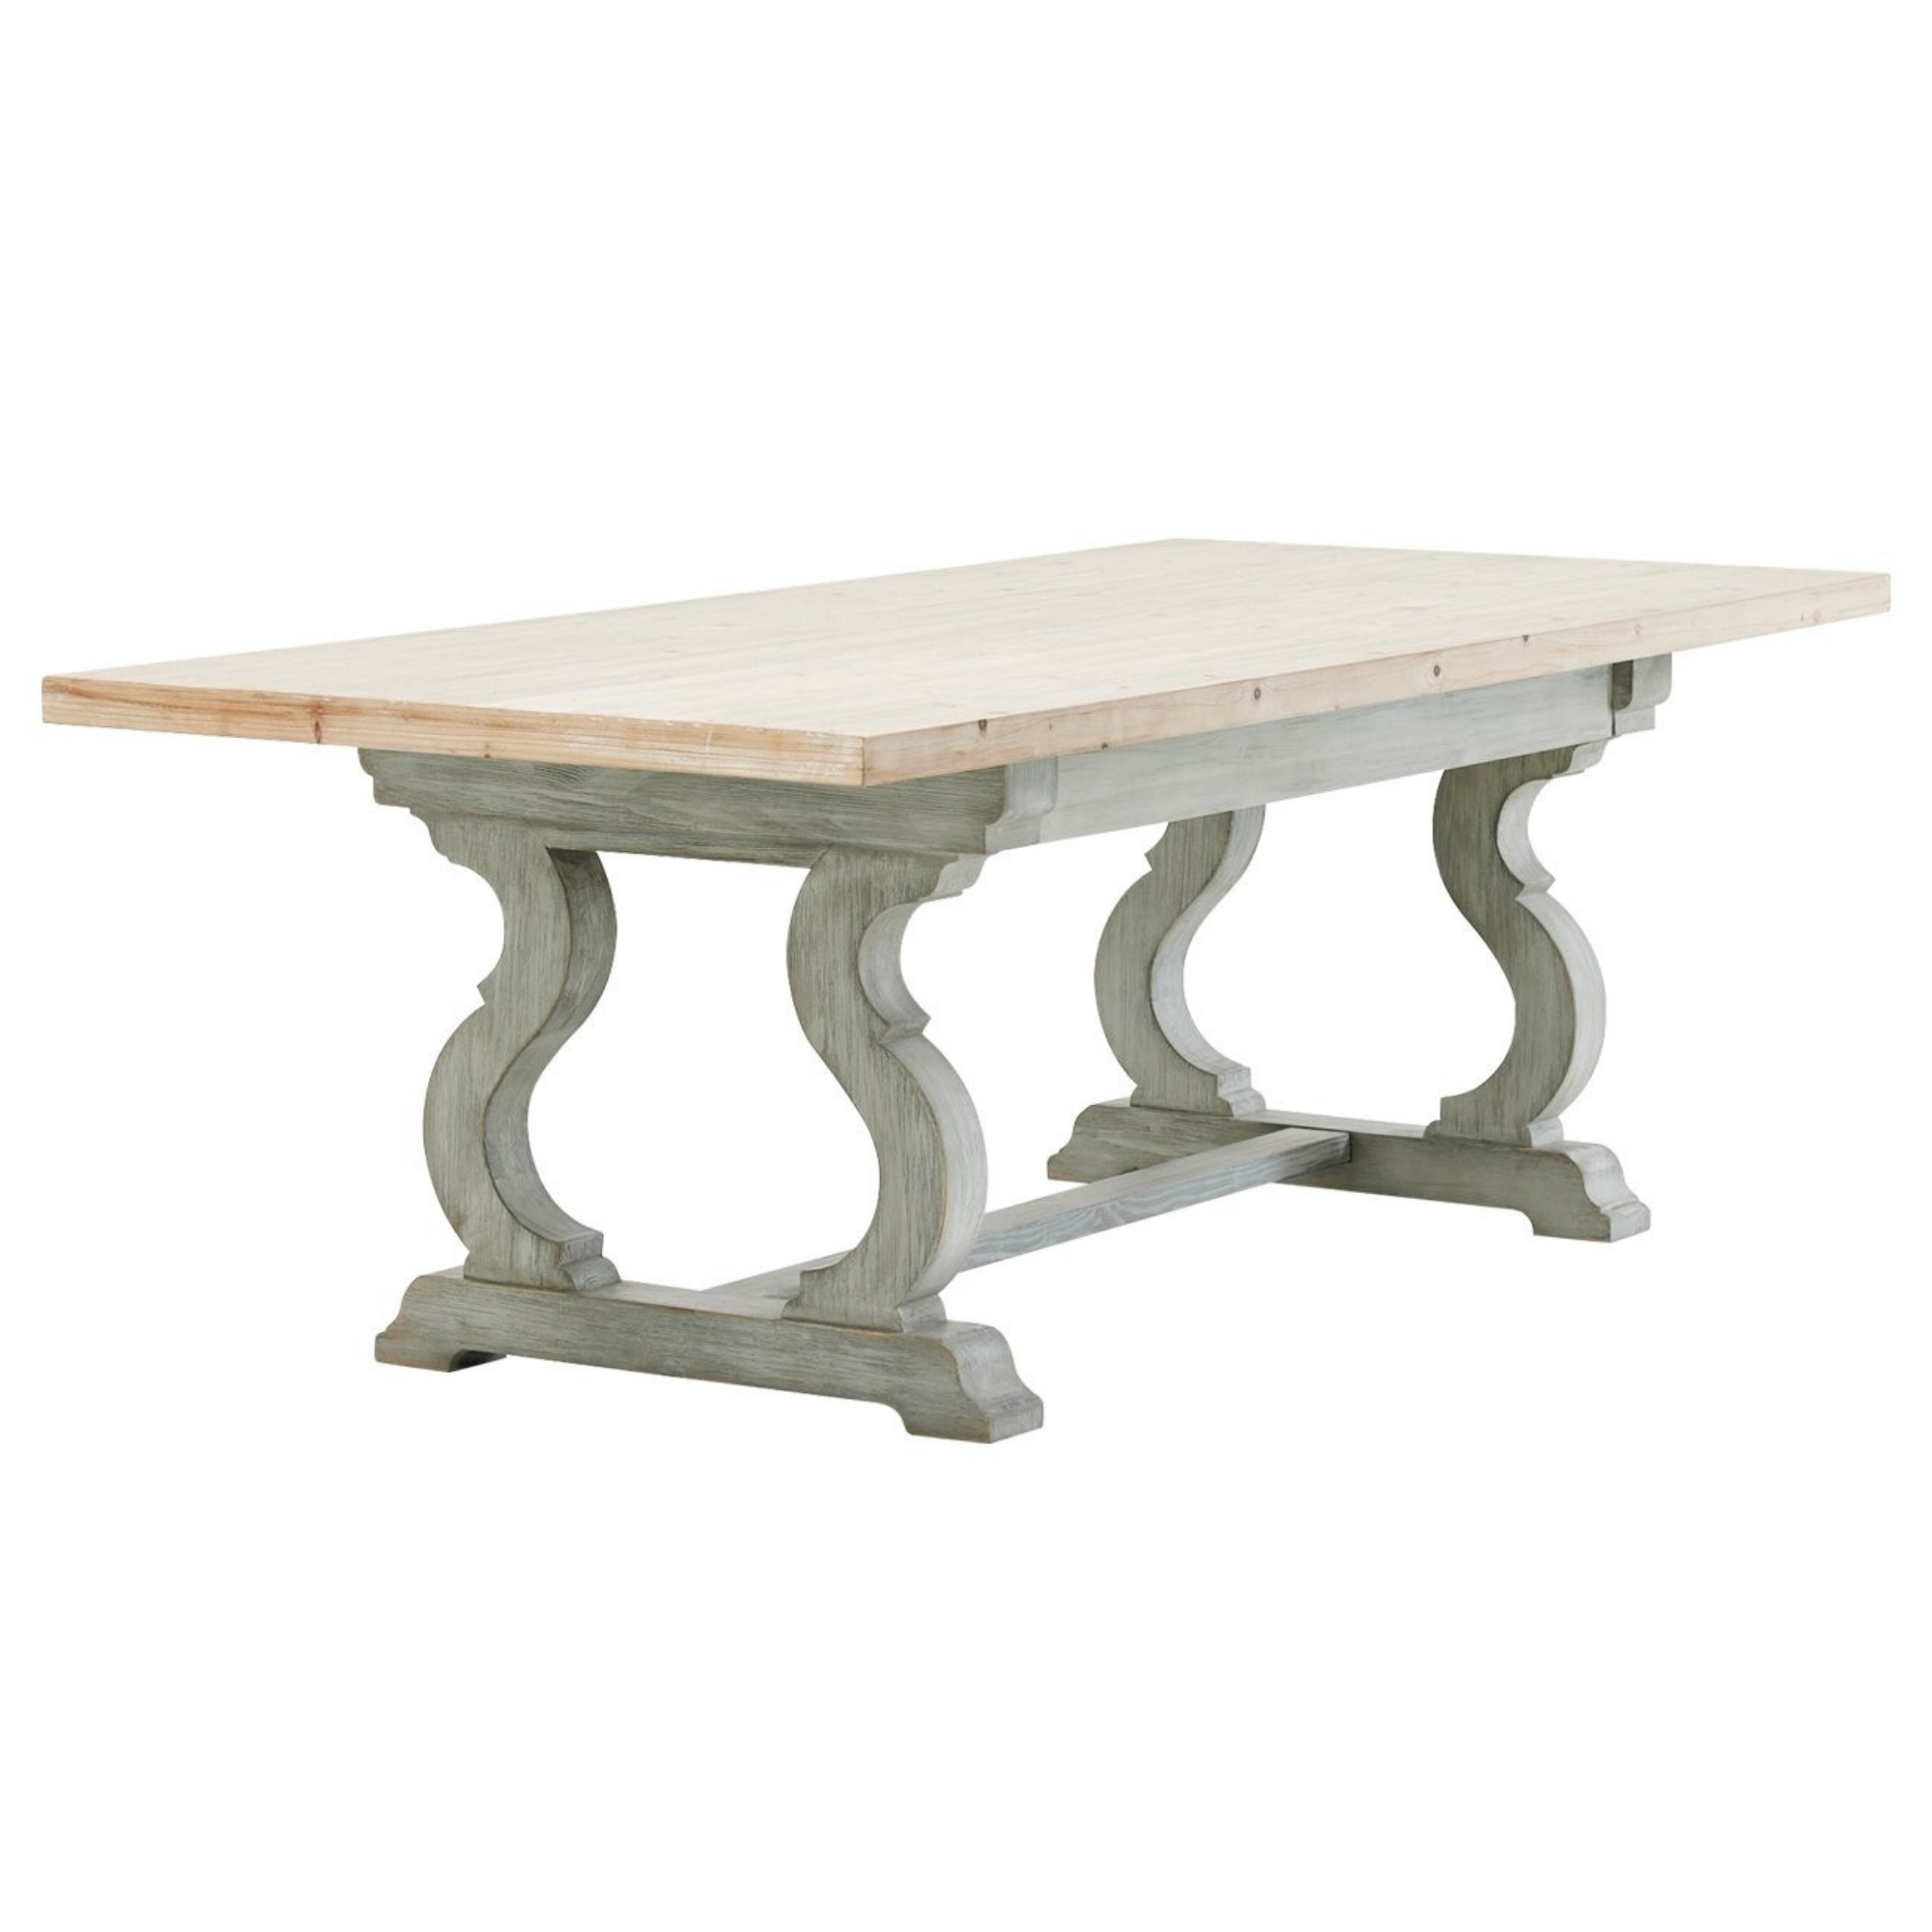 FULLERTON EXTENSION DINING TABLE